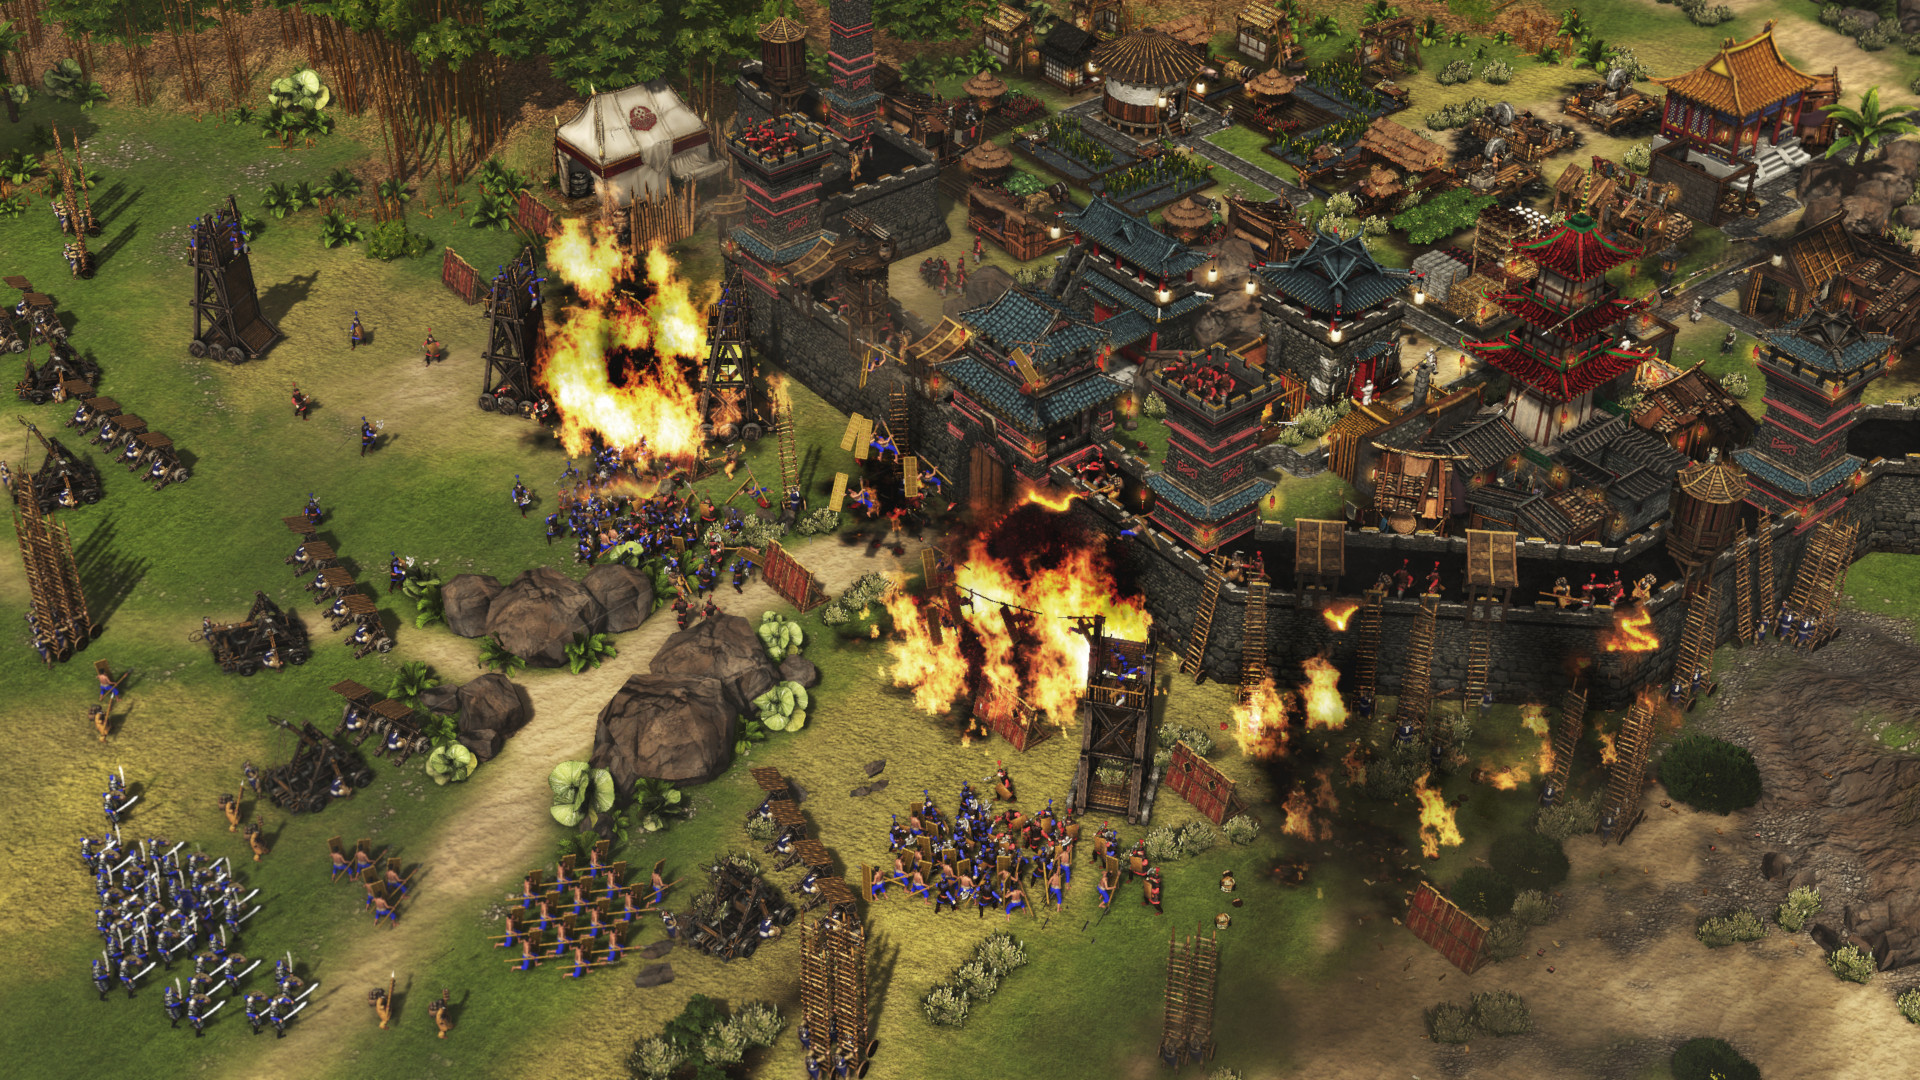 Stronghold: Warlords Demo Featured Screenshot #1